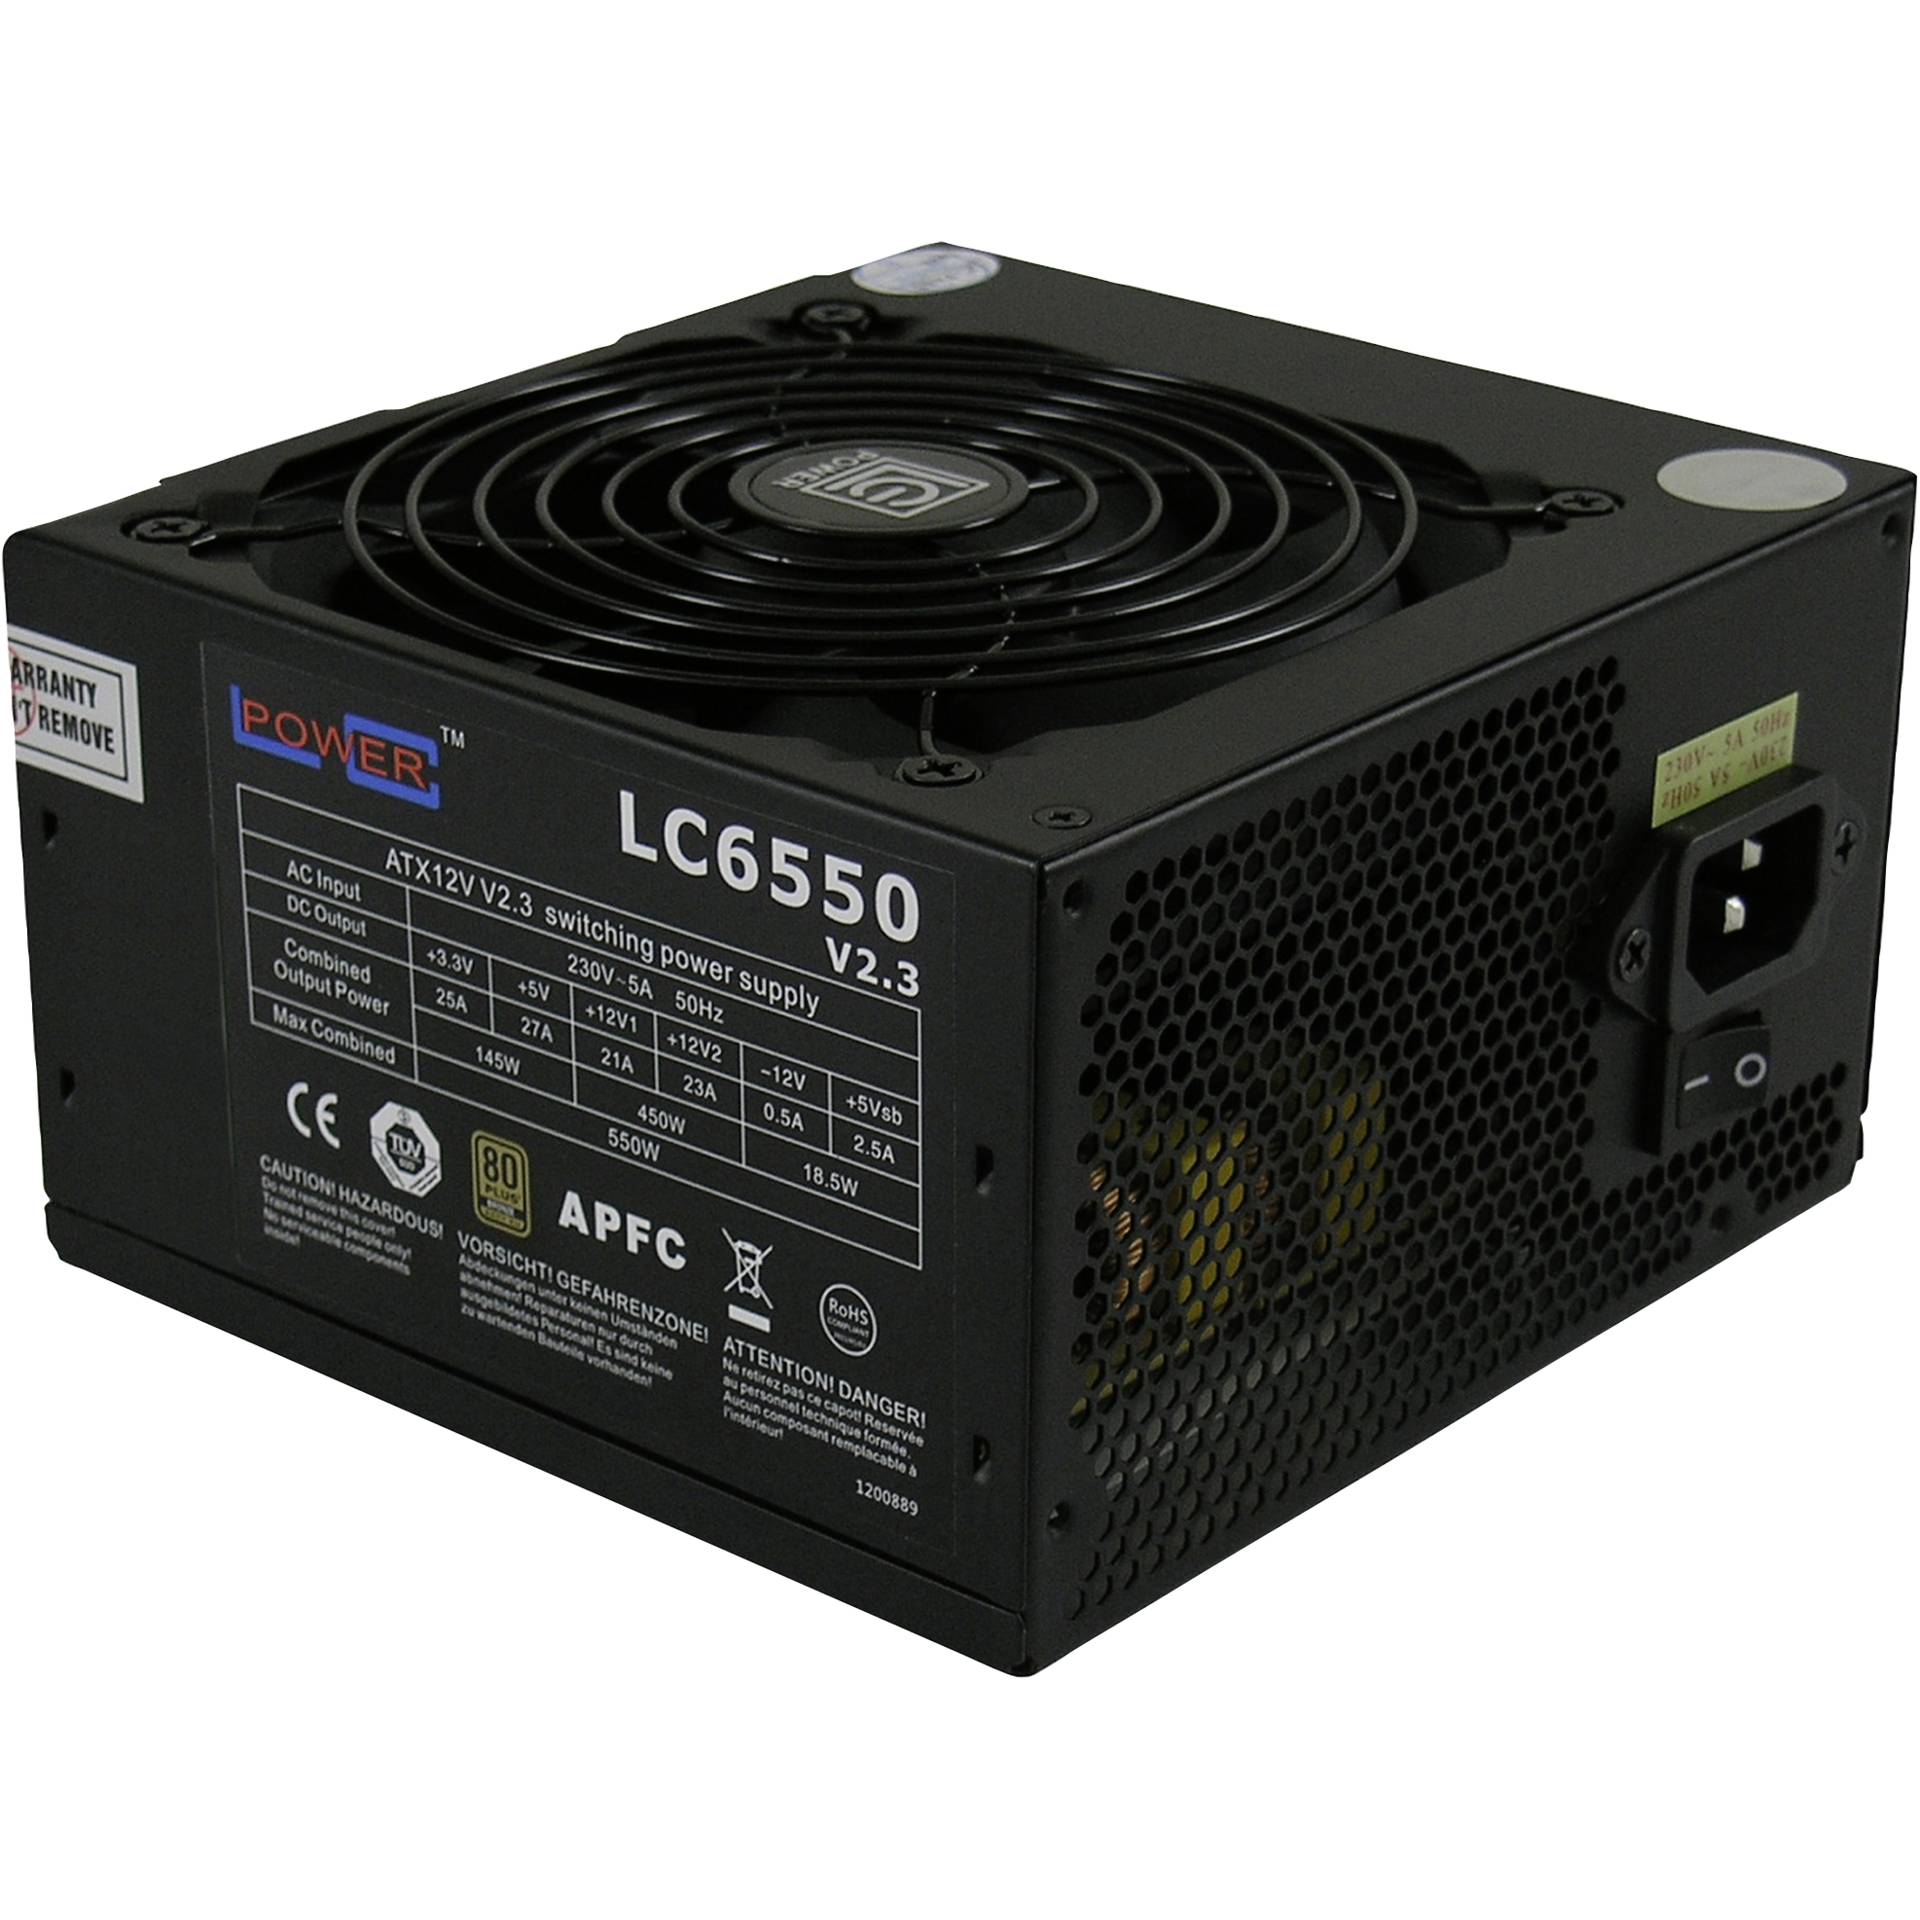 LC Power LC6550 V2.3 120mm, 20/24 pin